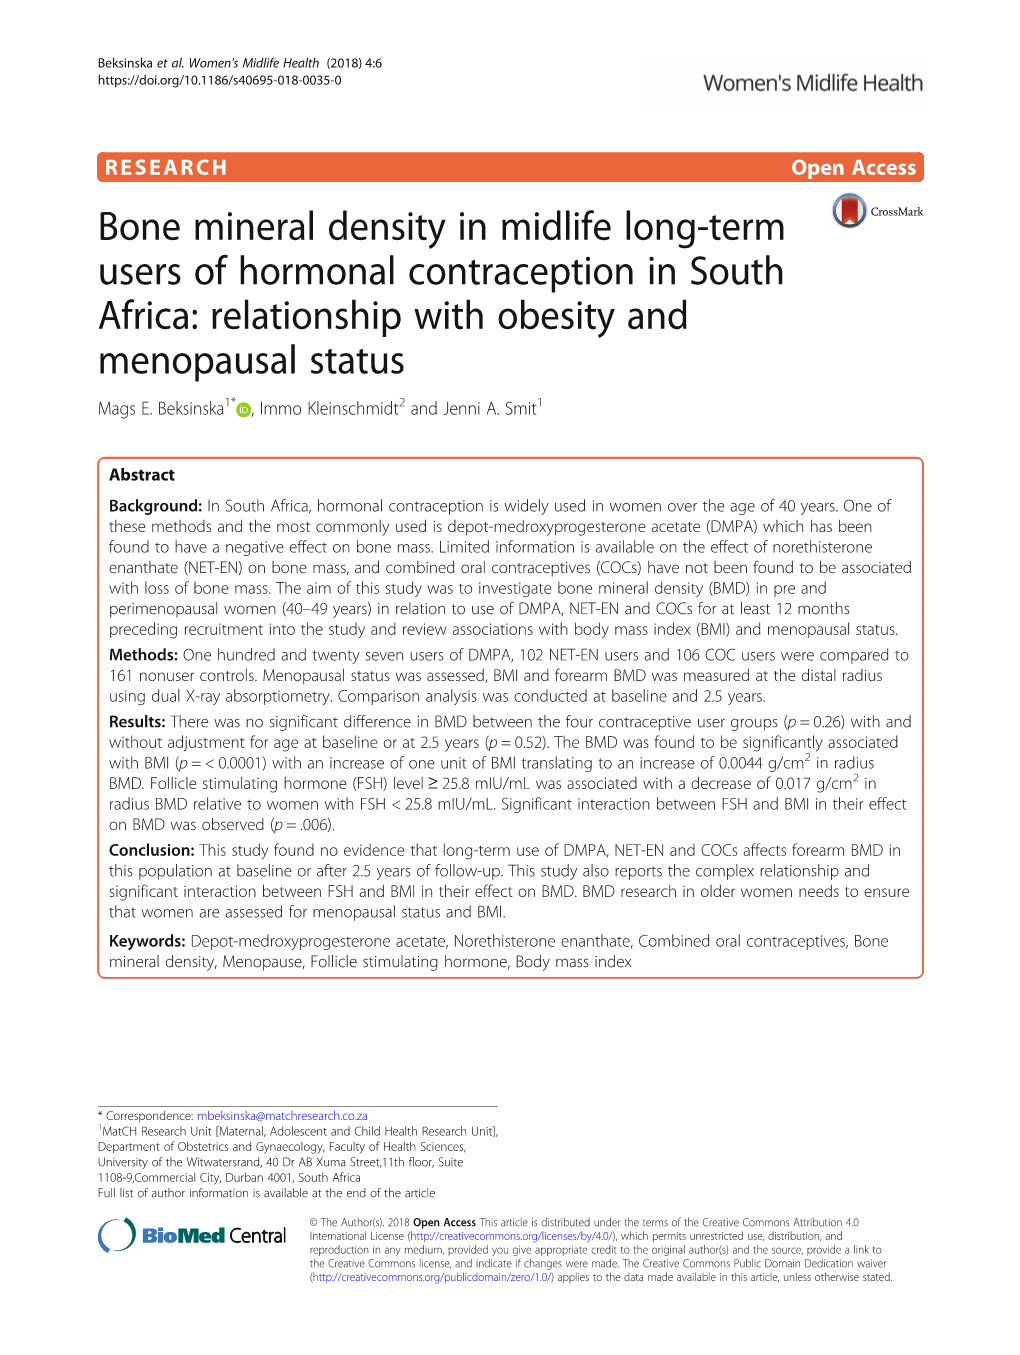 Bone Mineral Density in Midlife Long-Term Users of Hormonal Contraception in South Africa: Relationship with Obesity and Menopausal Status Mags E